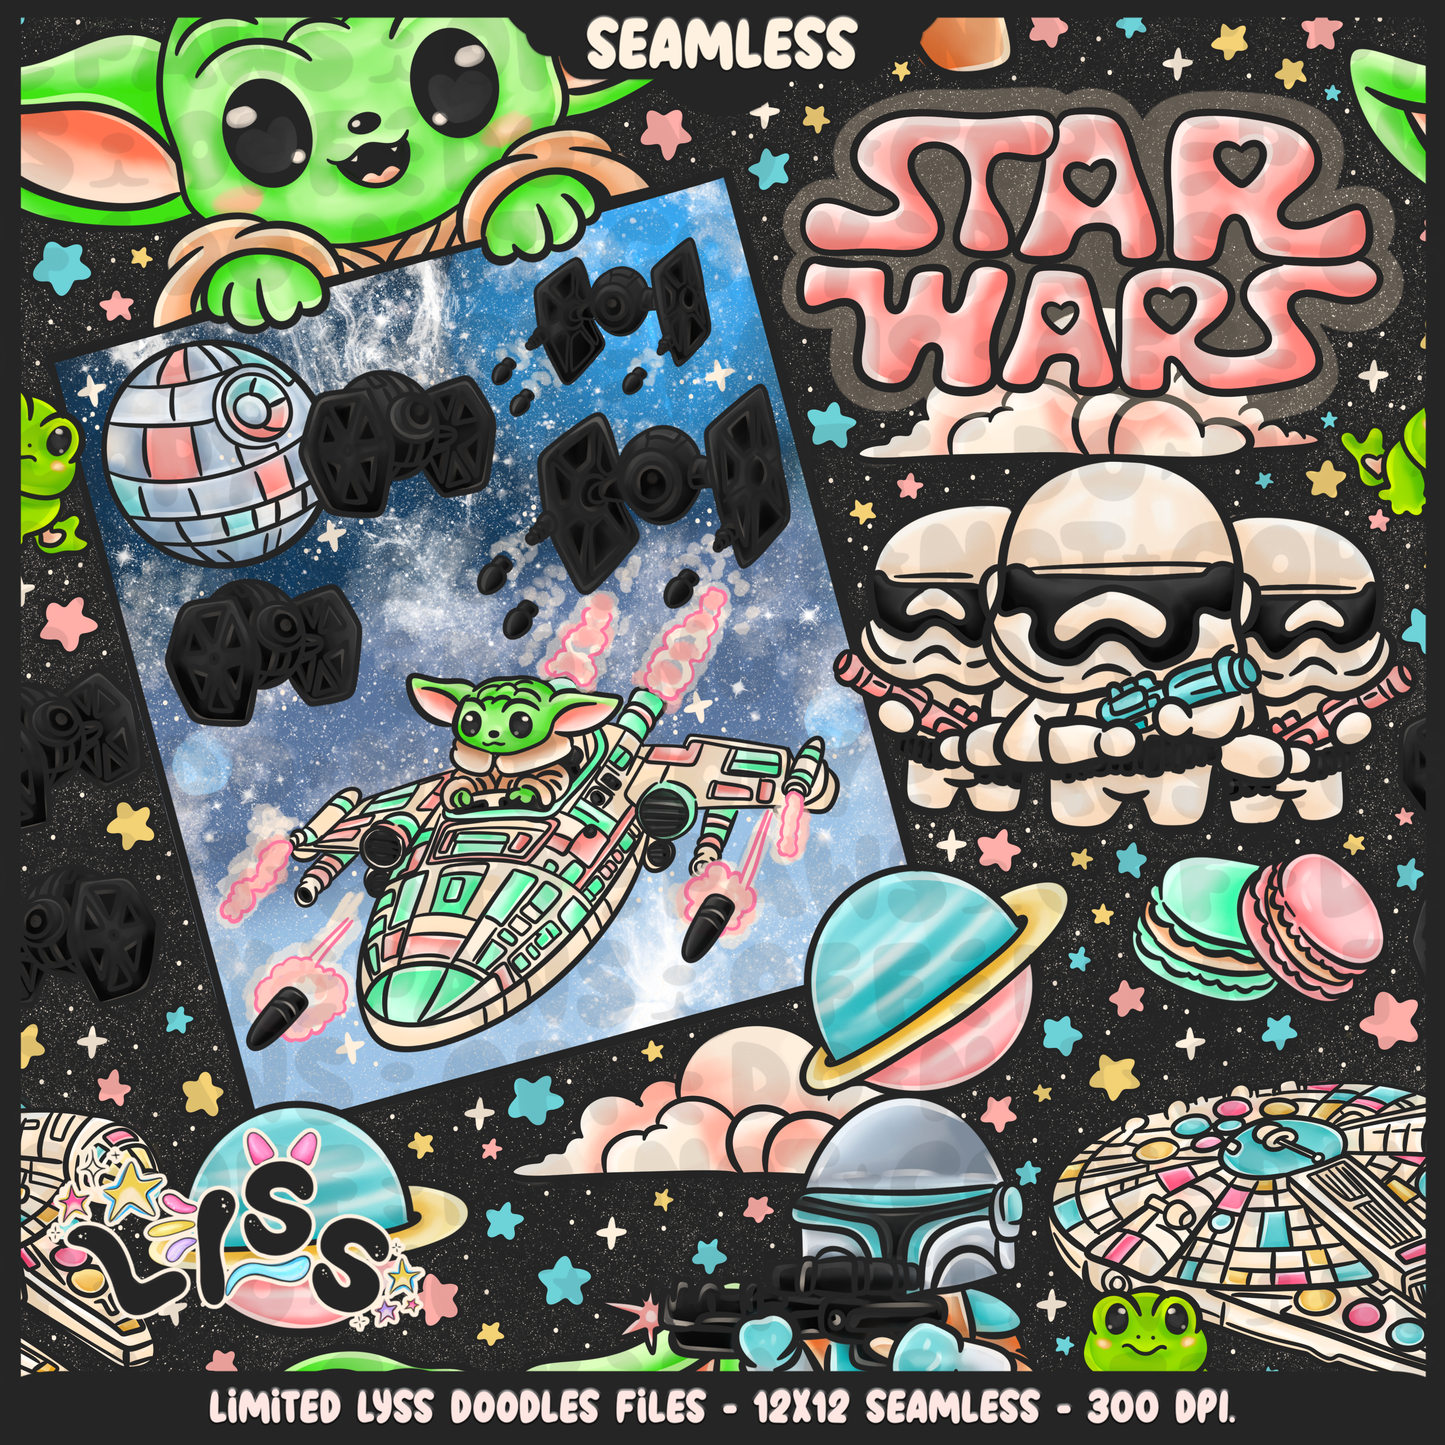 2024 - Lyss Doodles - Seamless - Mains - May Fourth Event - Space Battle - 24LD043